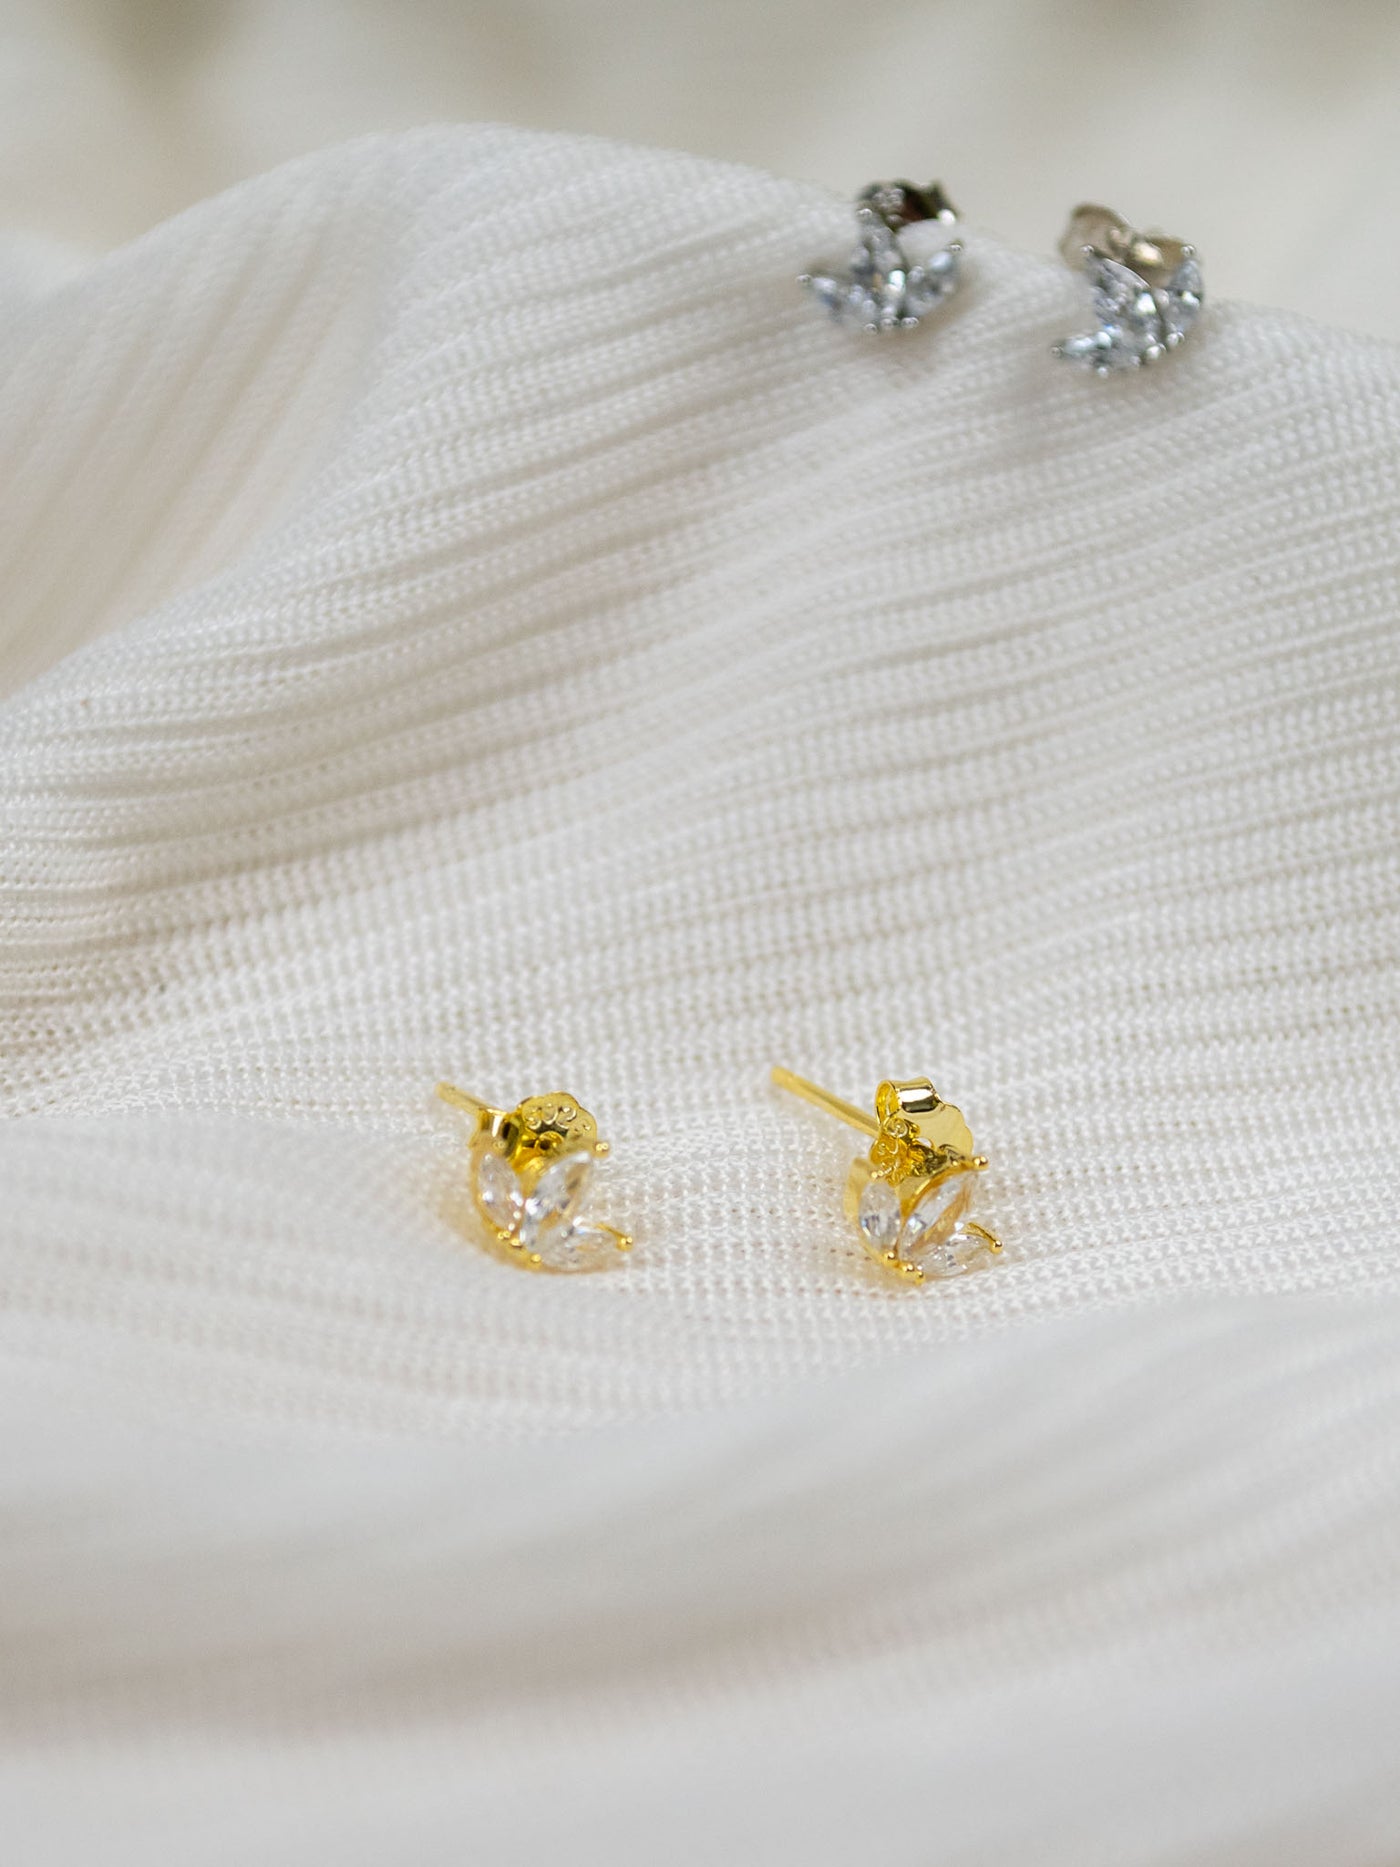 Two pairs of silver and gold CZ stone stud earrings in a lotus shape.